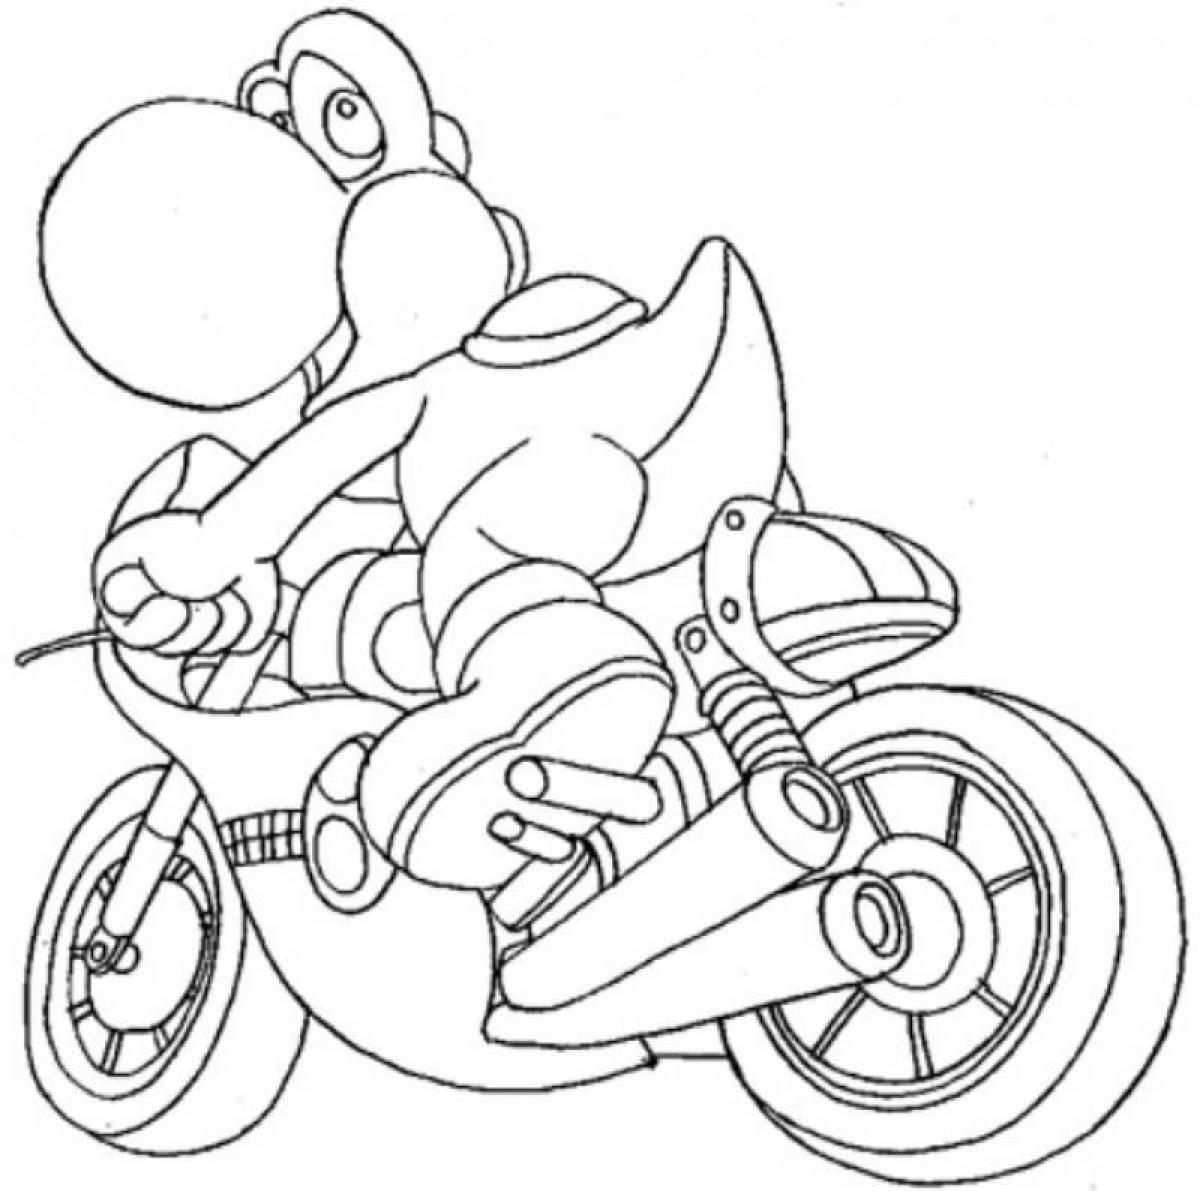 Yoshi Coloring Pages Riding Motorcycle Max Super Mario In 2020